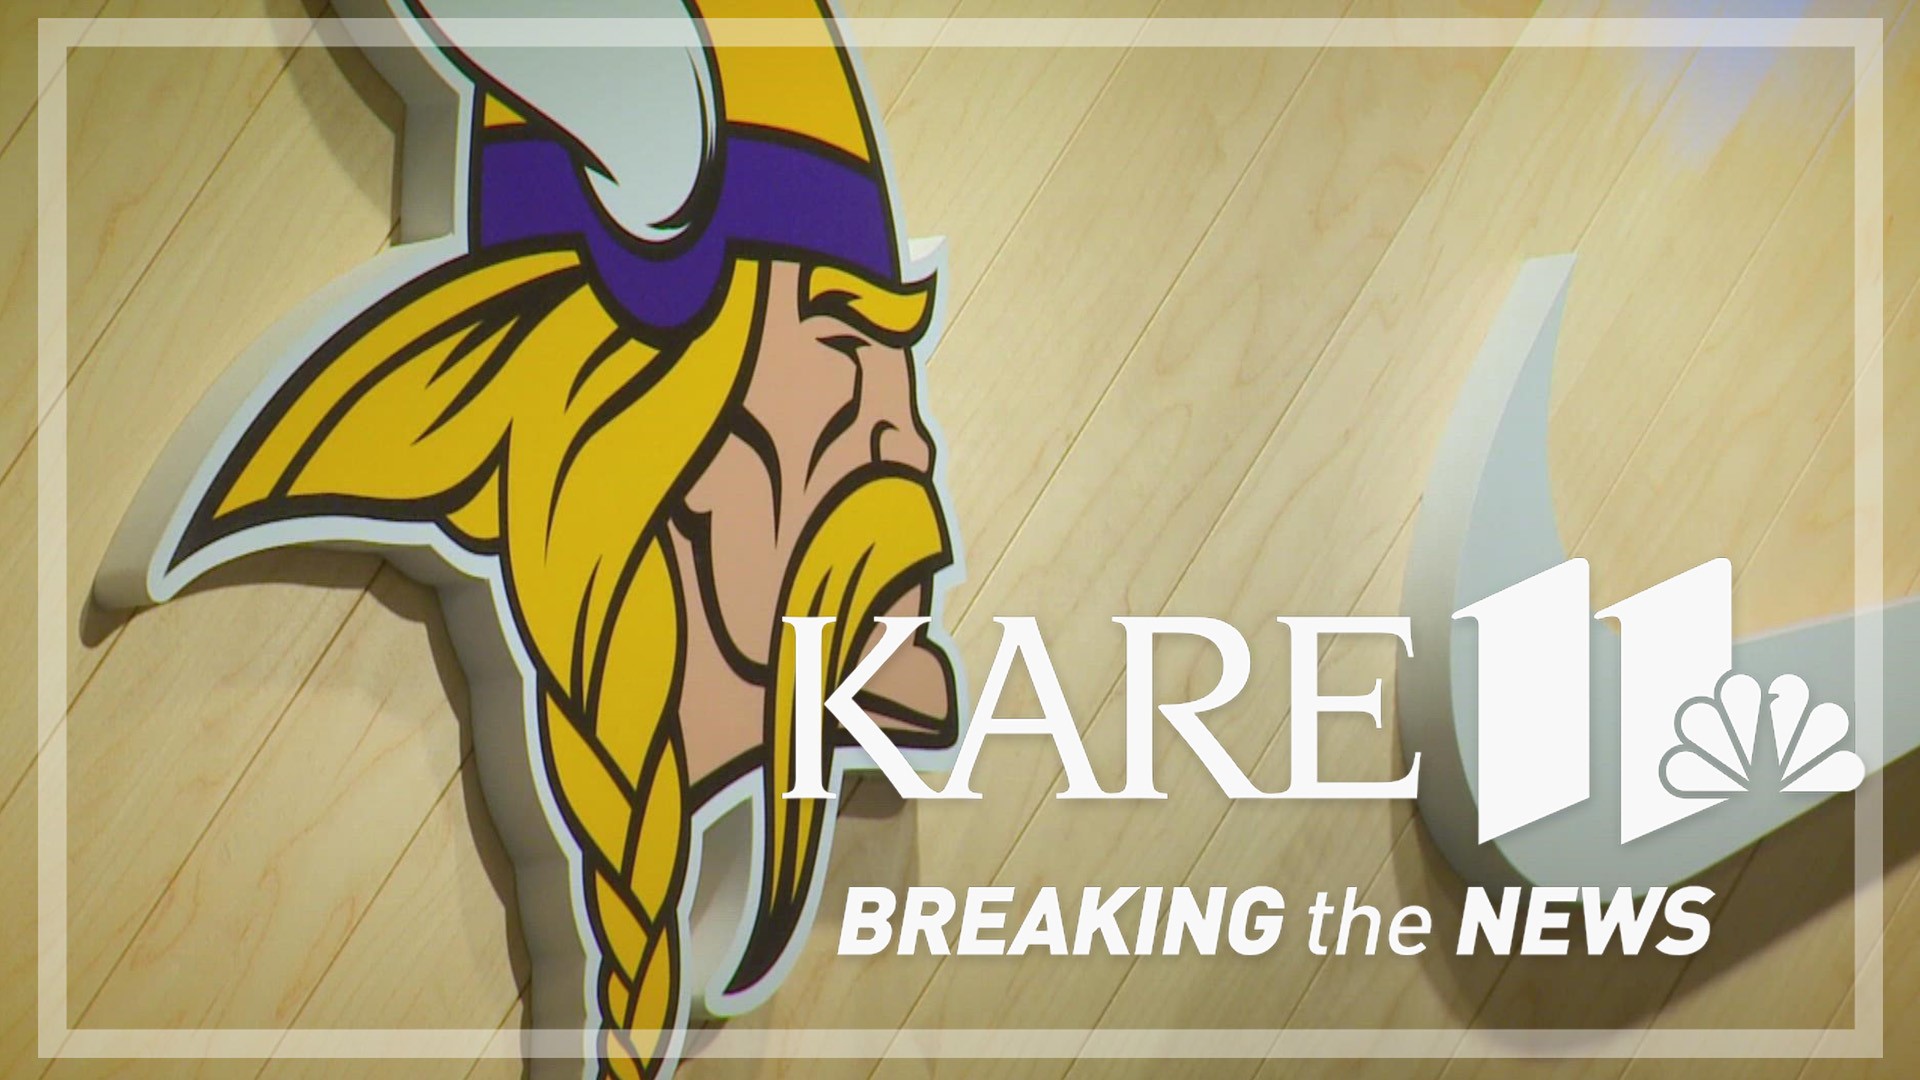 The Vikings are 6-4 and play the Broncos Sunday night on KARE 11 at 7:20 p.m.